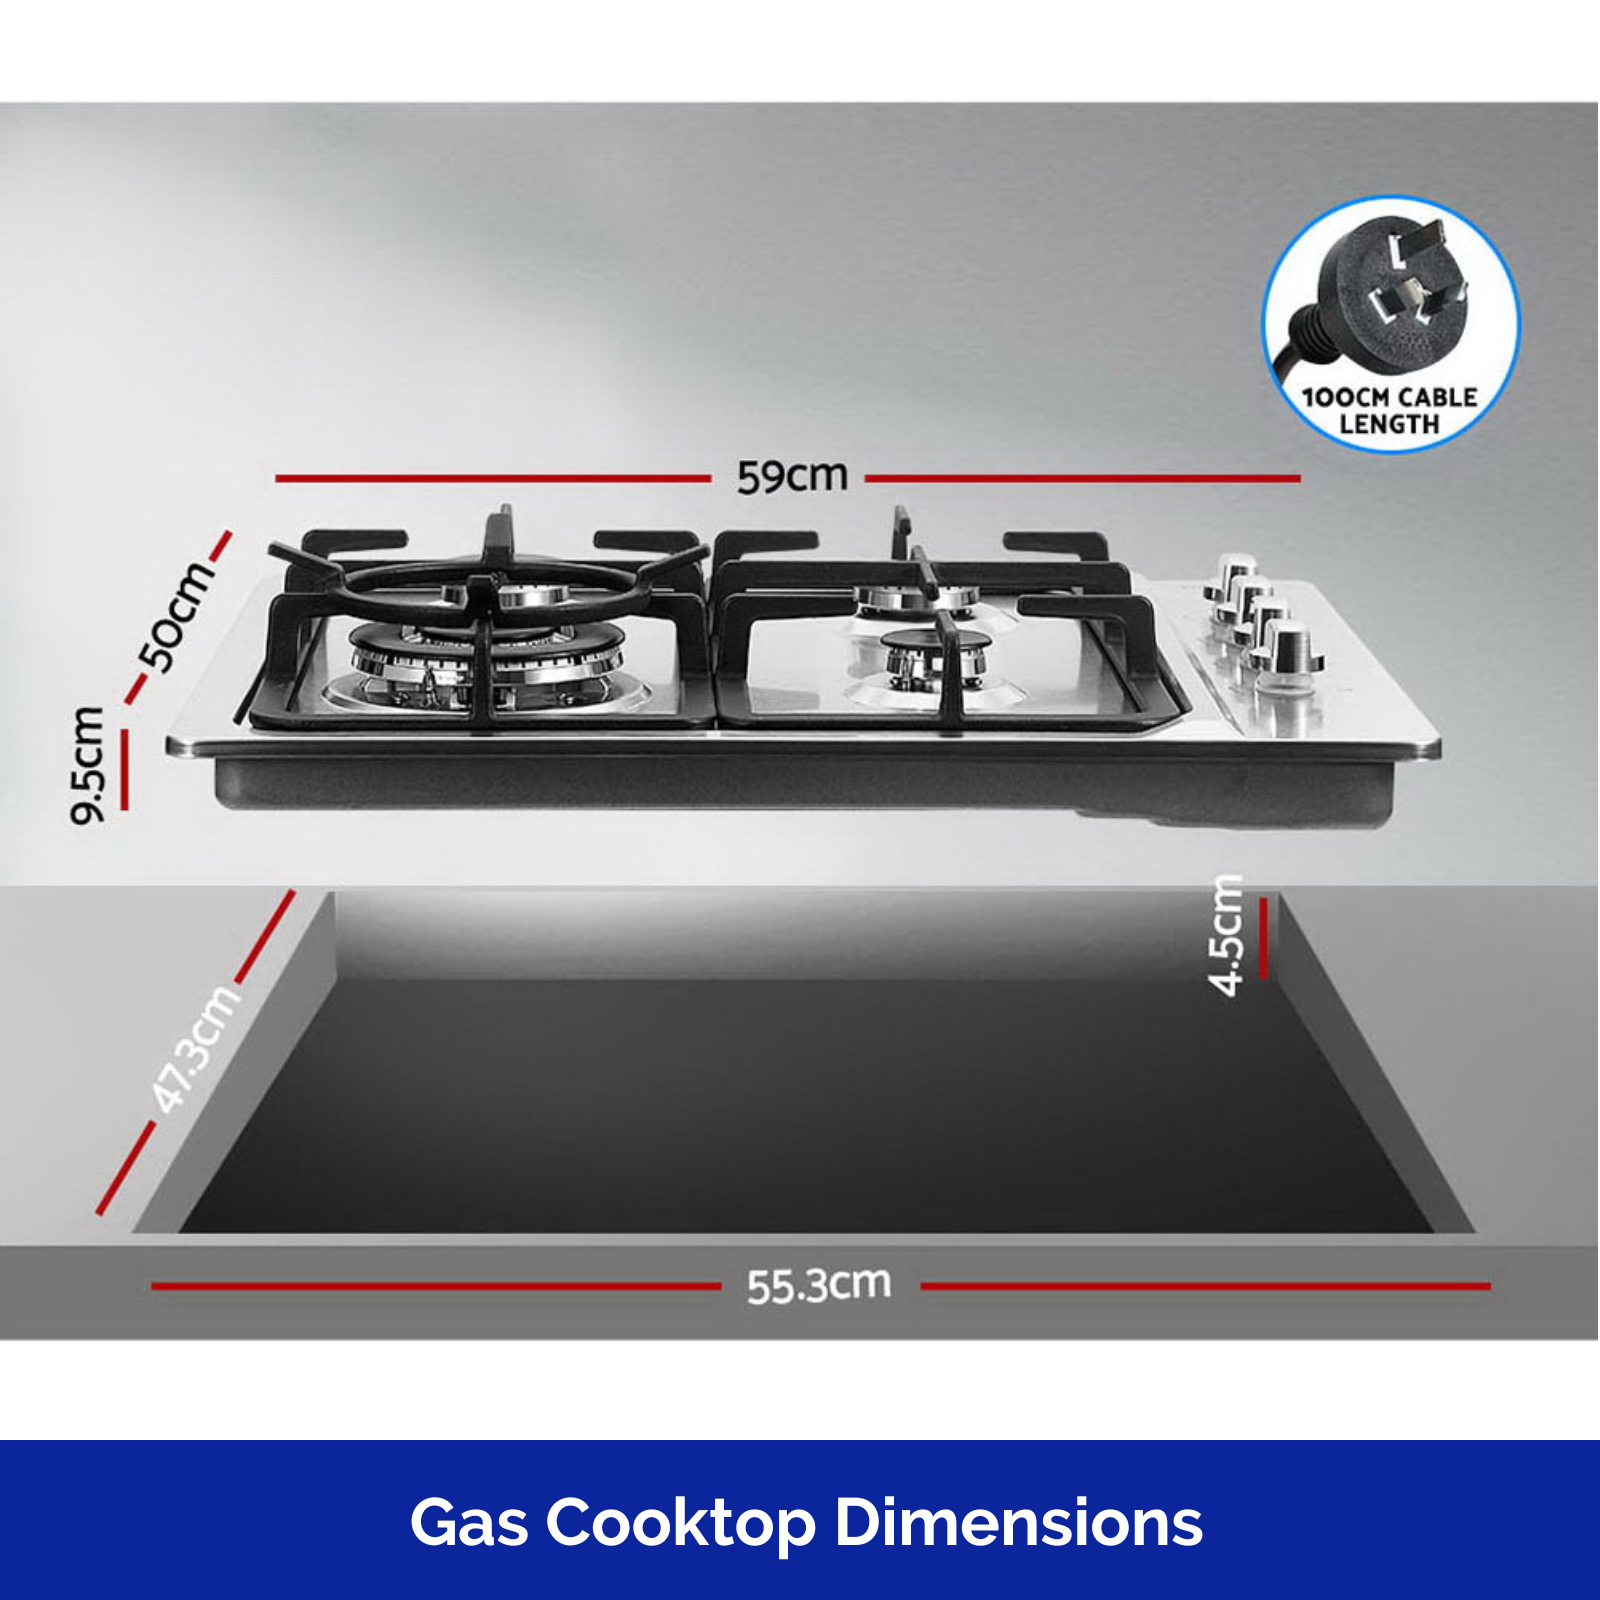 Devanti Gas Cooktop 60cm Kitchen Stove 4 Burner Cook Top NG LPG Stainless Steel Dimensions 